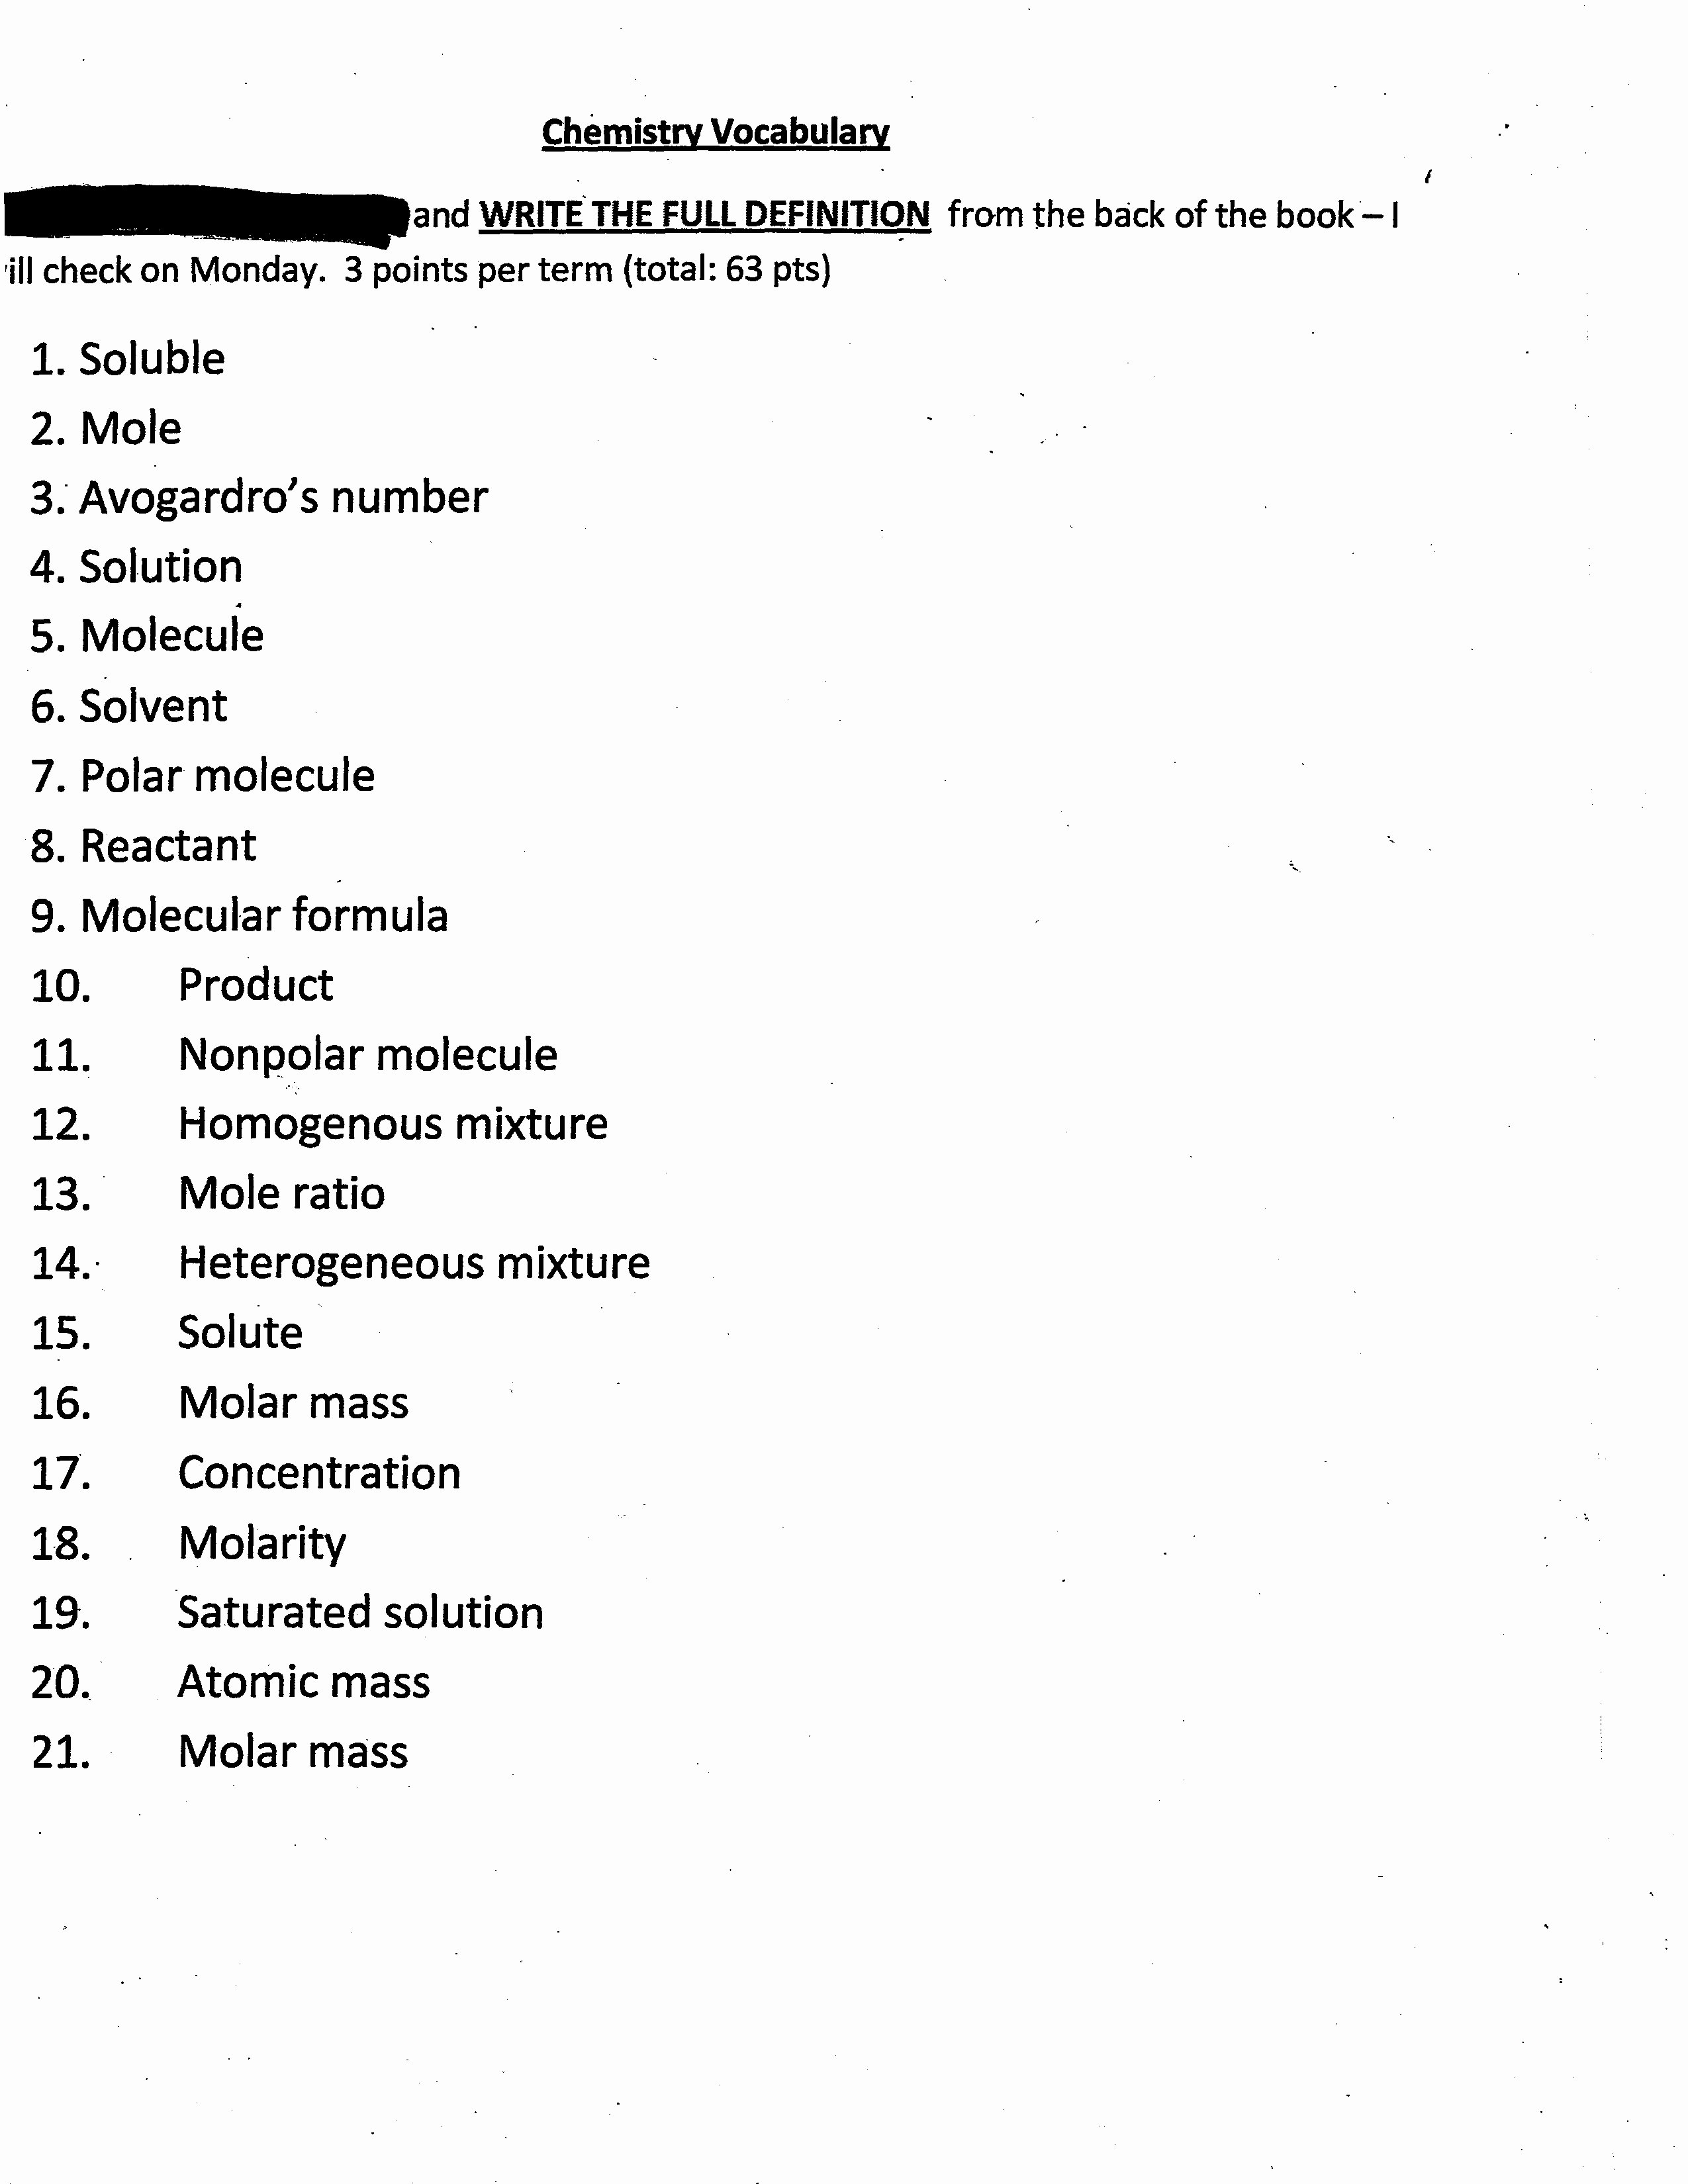 Temperature Conversion Worksheet Answers Best Of Temperature Conversion Worksheet Answers the Best